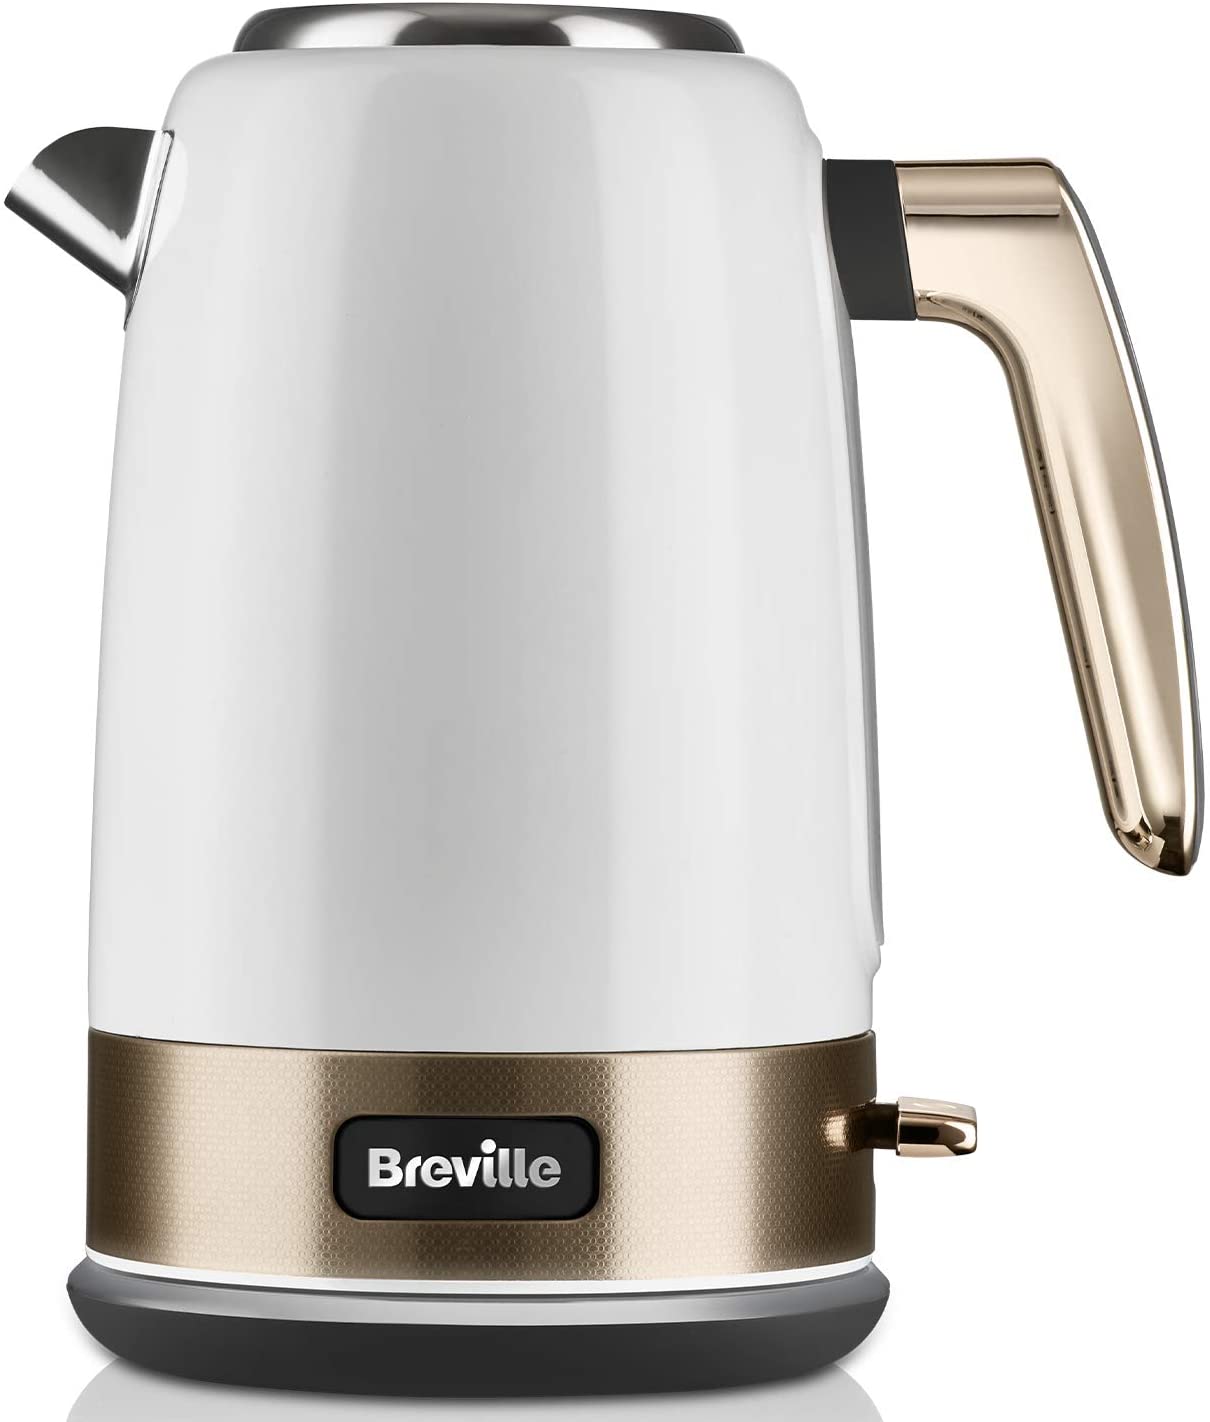 Breville-New-York-Collection-Electric-Jug-Kettle-Fast-Boil-3kw-1.7L-White-&-Gold